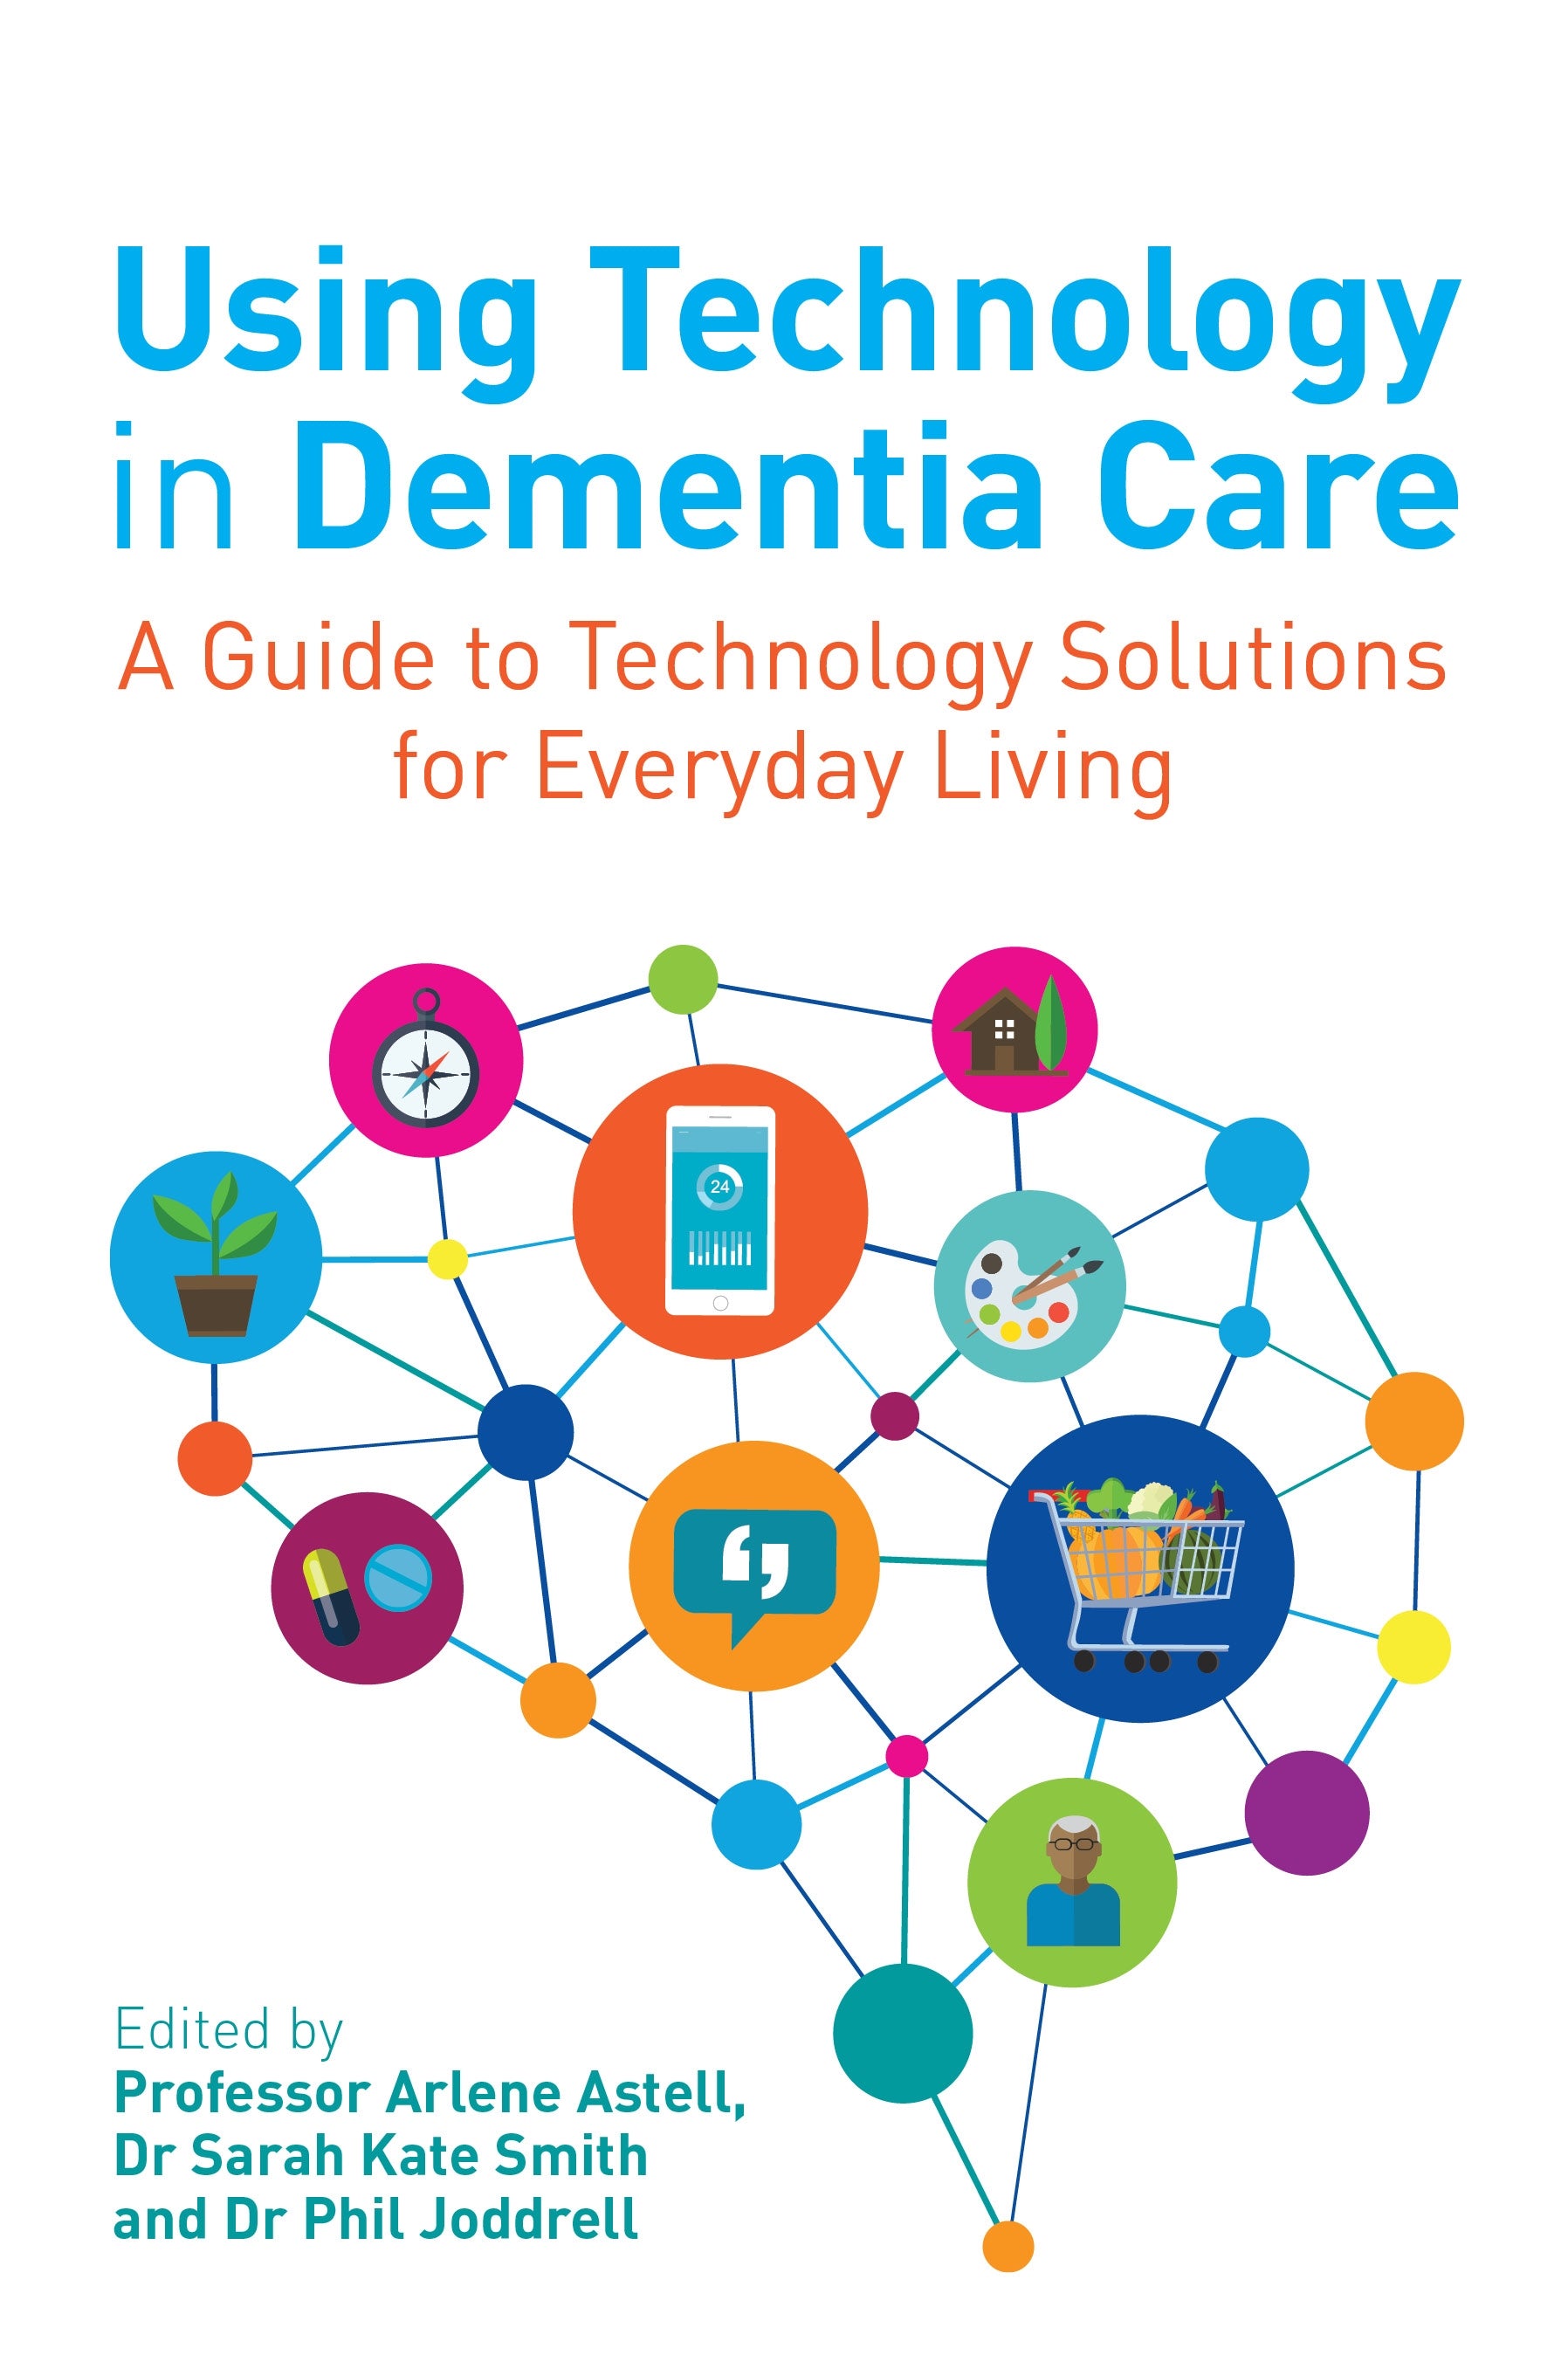 Using Technology in Dementia Care by No Author Listed, Arlene Astell, Sarah Smith, Phil Joddrell